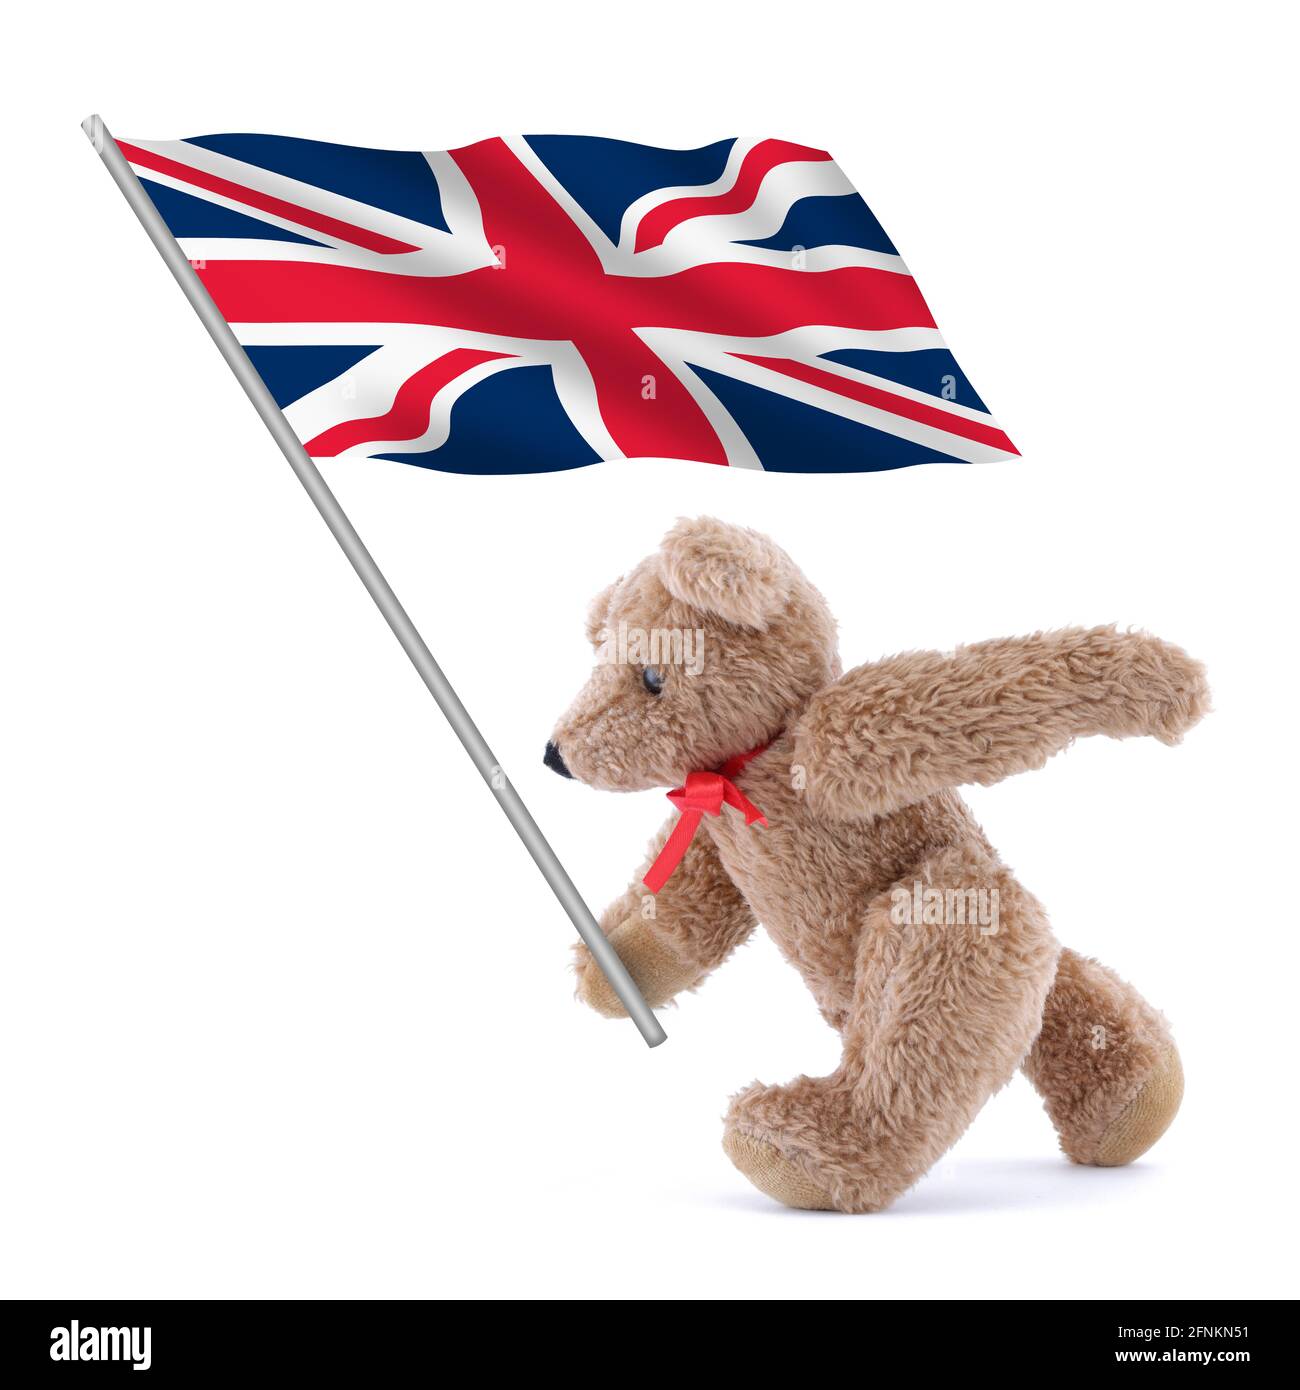 United Kingdom Great Britain flag union jack being carried by a cute teddy bear Stock Photo